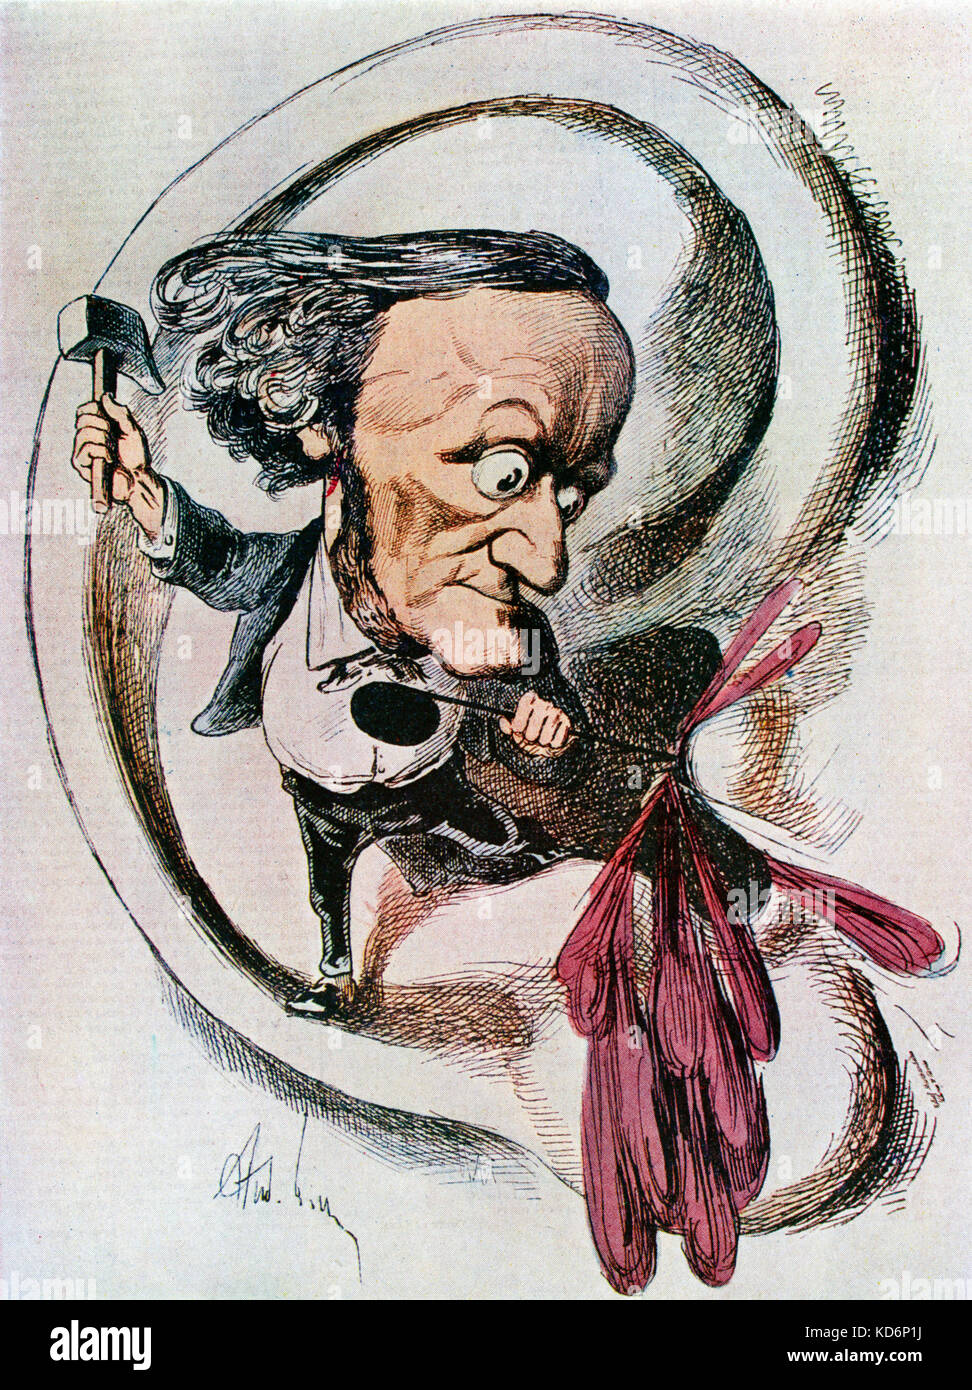 Richard Wagner caricature by Andre Gill from L'Eclipse, April 1869.   German composer & author, 22 May 1813 - 13 February 1883. Stock Photo